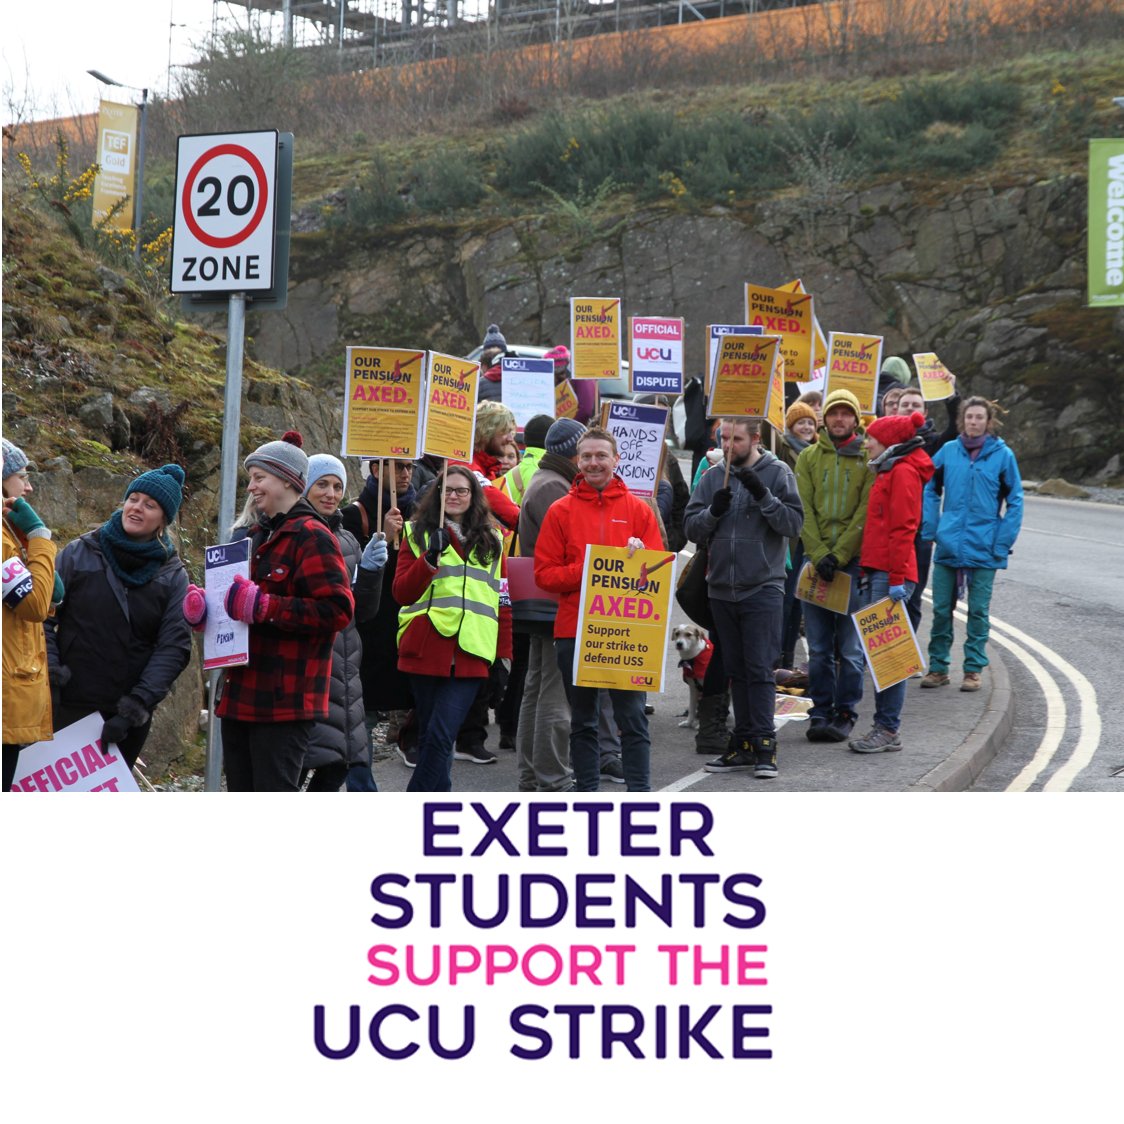 Student led support of the UCU's strike action at Exeter University's Penryn Campus.